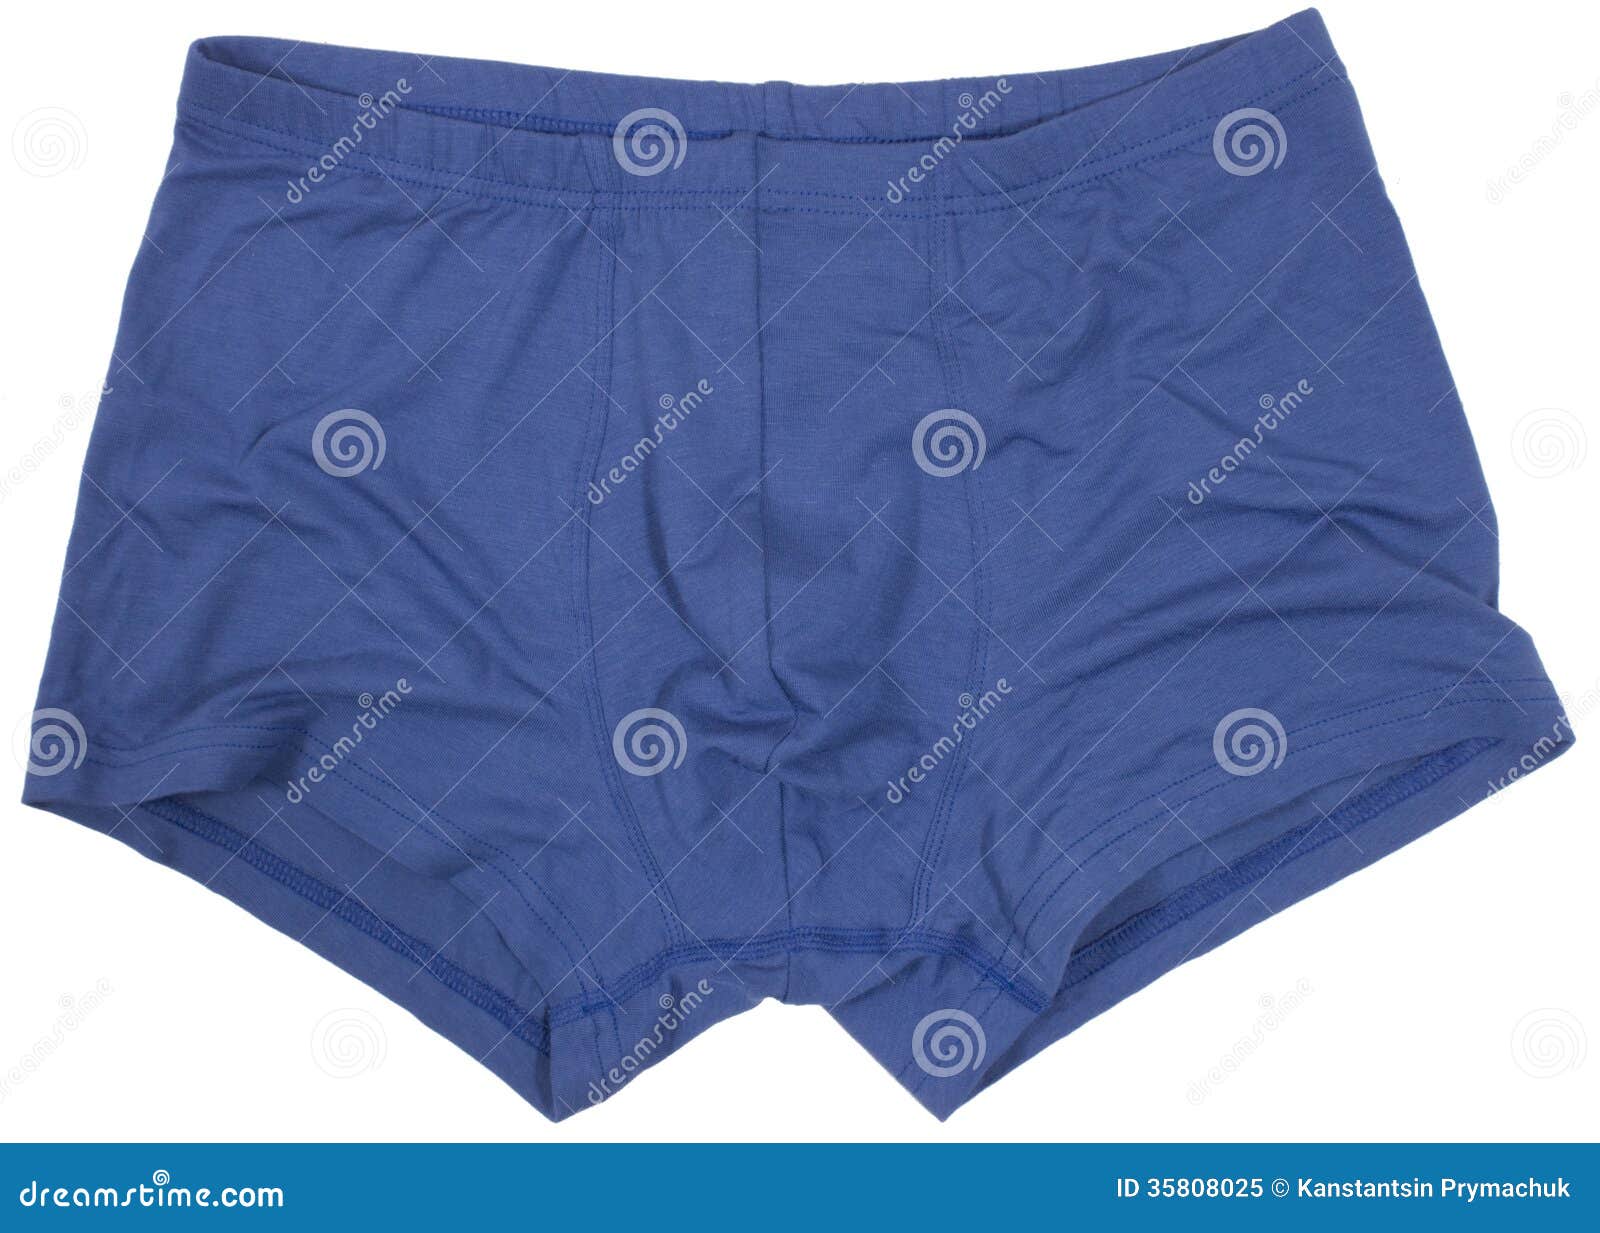 Male Underwear Isolated on the White Stock Image - Image of style ...